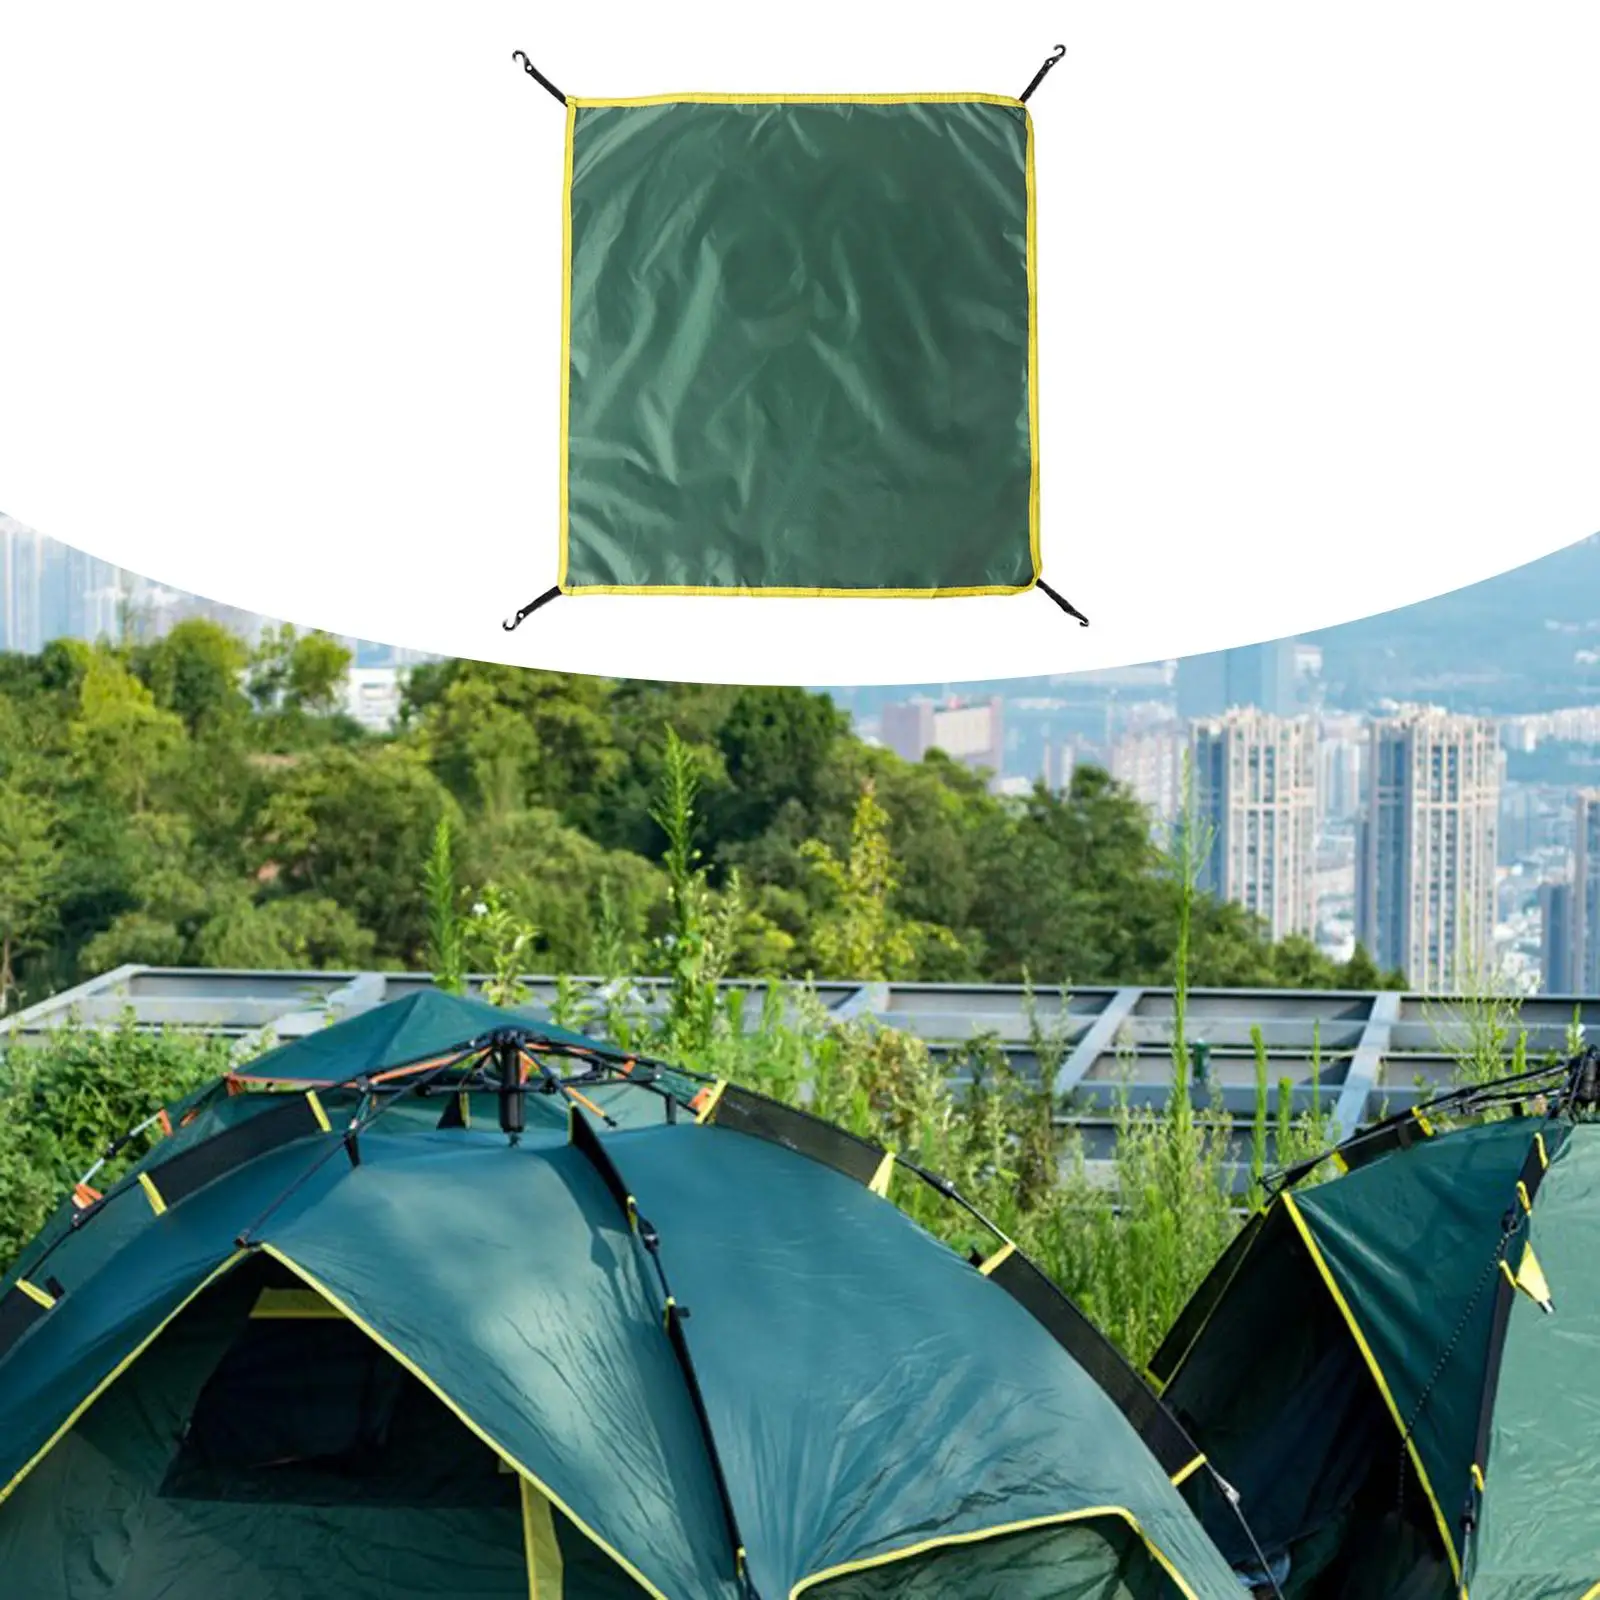 Rainfly Accessory Lightweight Tent Tarp Fits 3-4 Person Automatic Tent Tent Top Cover, Rain Fly Cloth for Camping Hiking